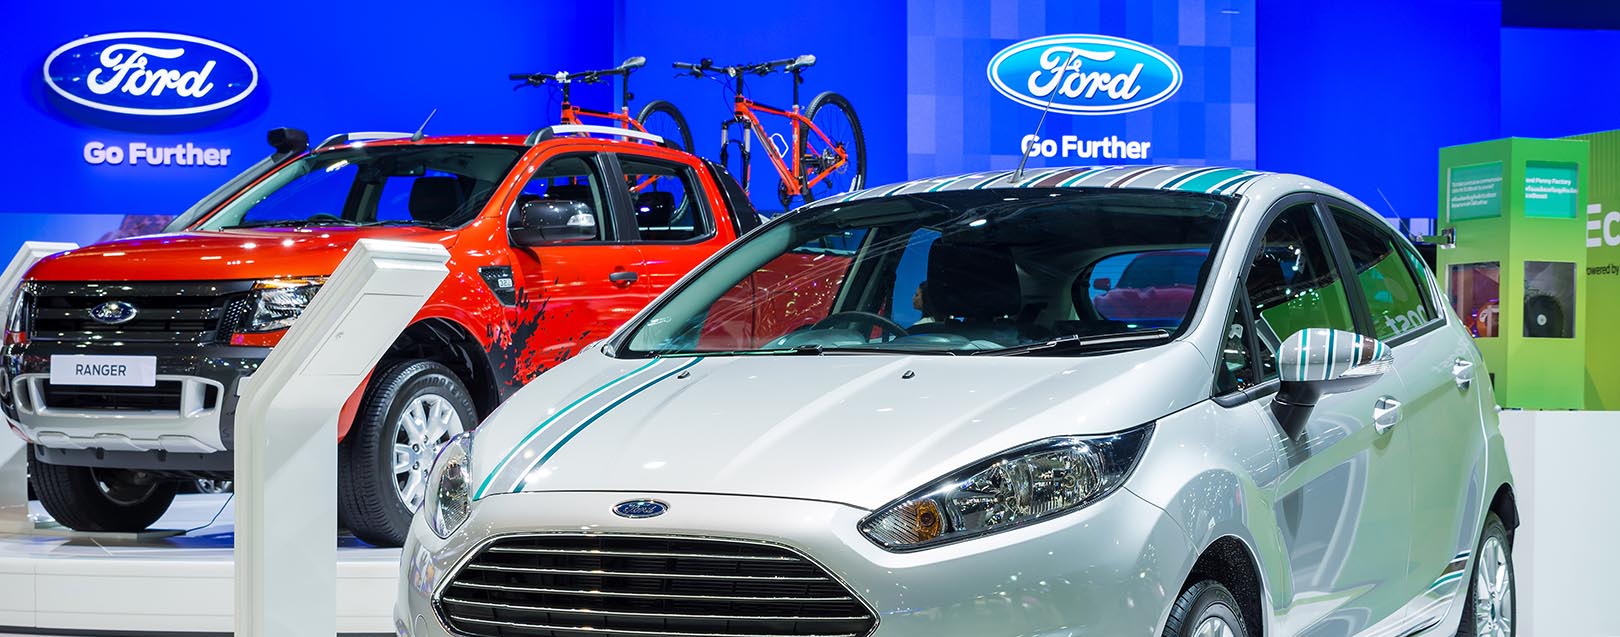 Ford looking for new partners to go beyond selling cars